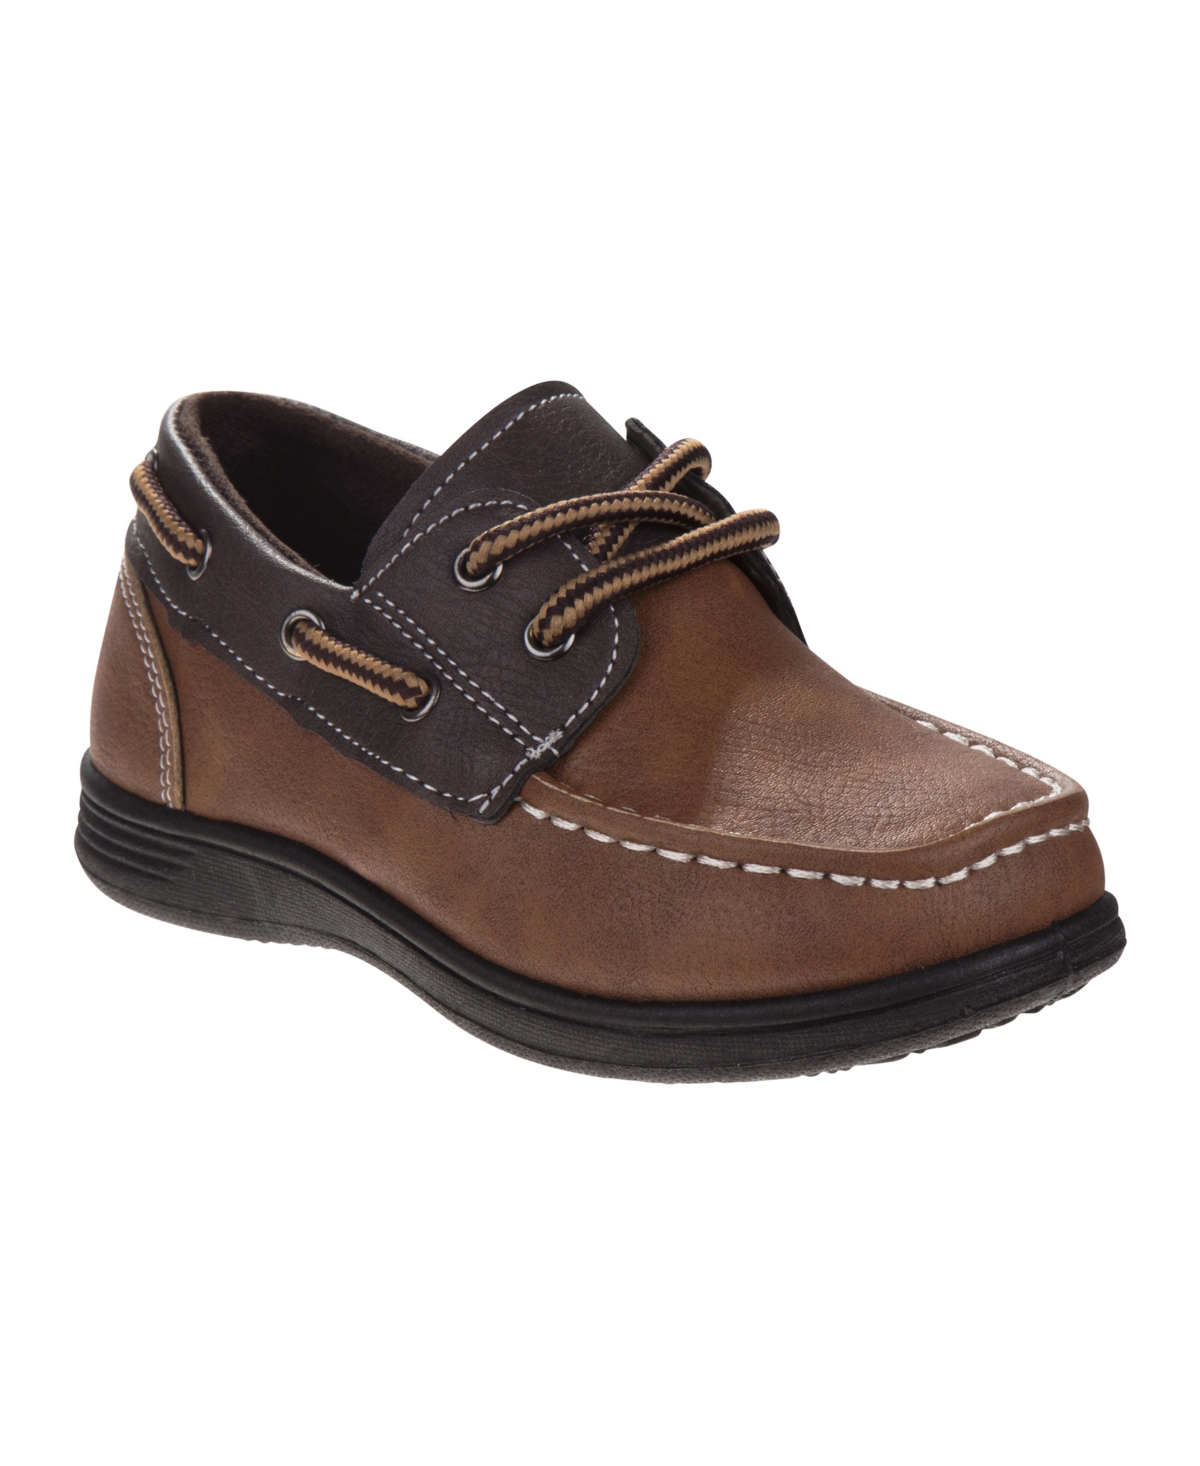 Shop Josmo Little Boys Boat Style Casual Shoes In Tan,brown